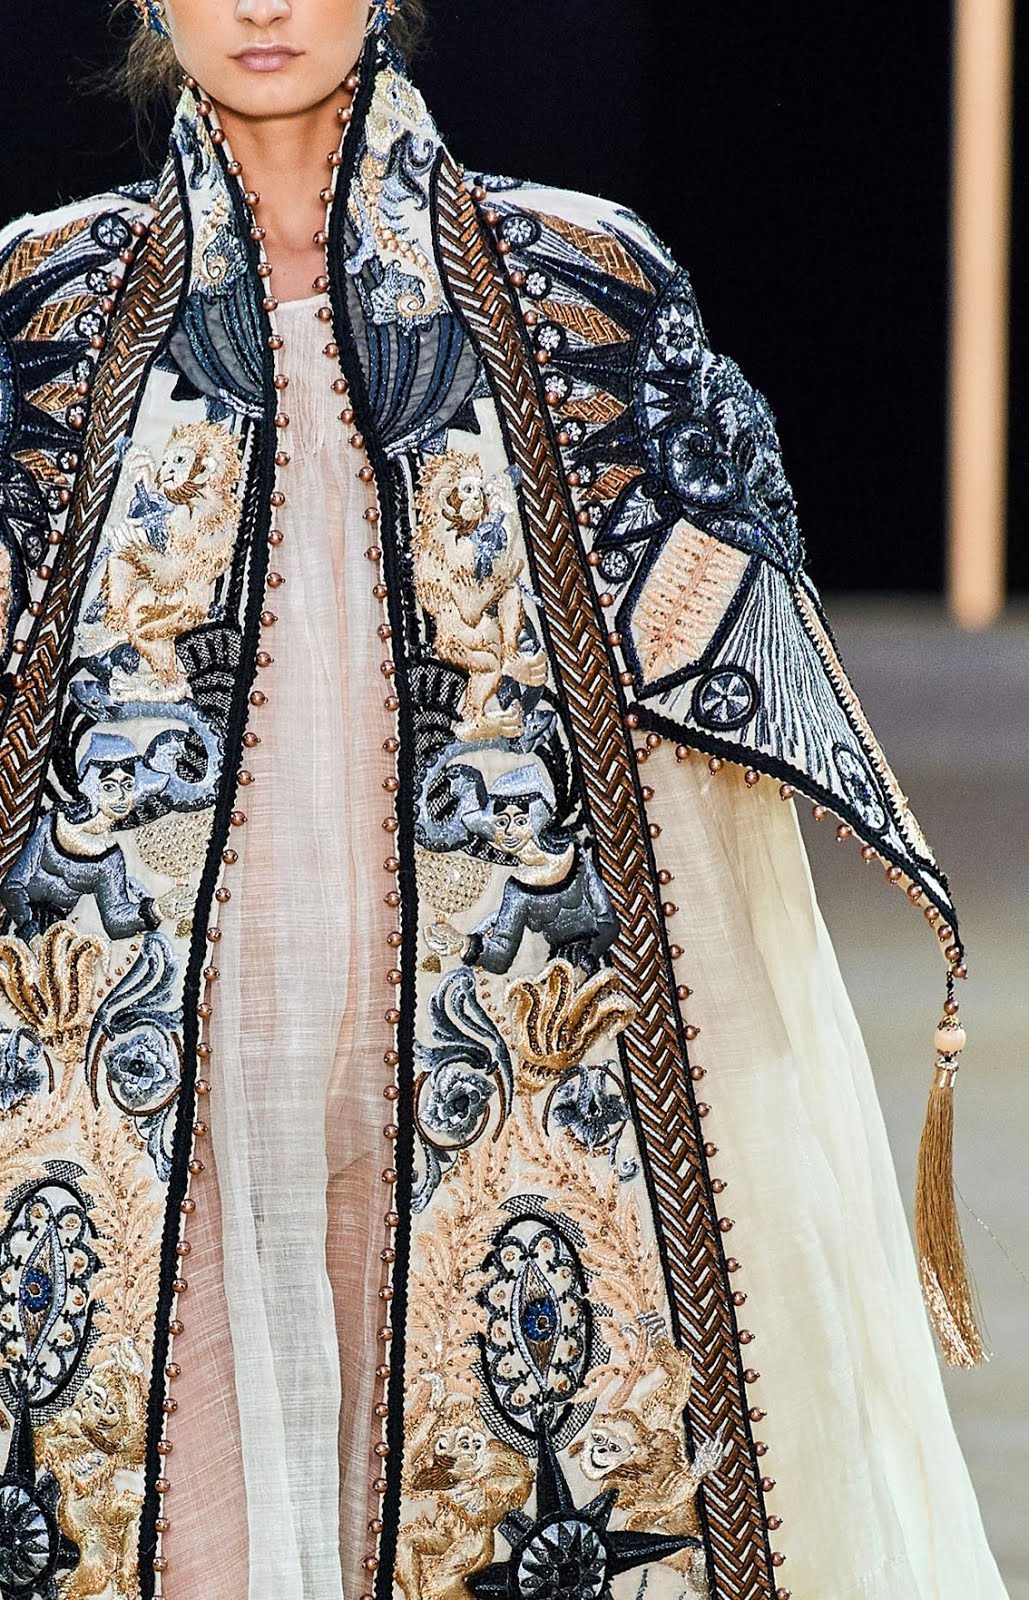 Close up: The Grecian-style silhouettes of Guo Pei AW 2019/20 Couture ...